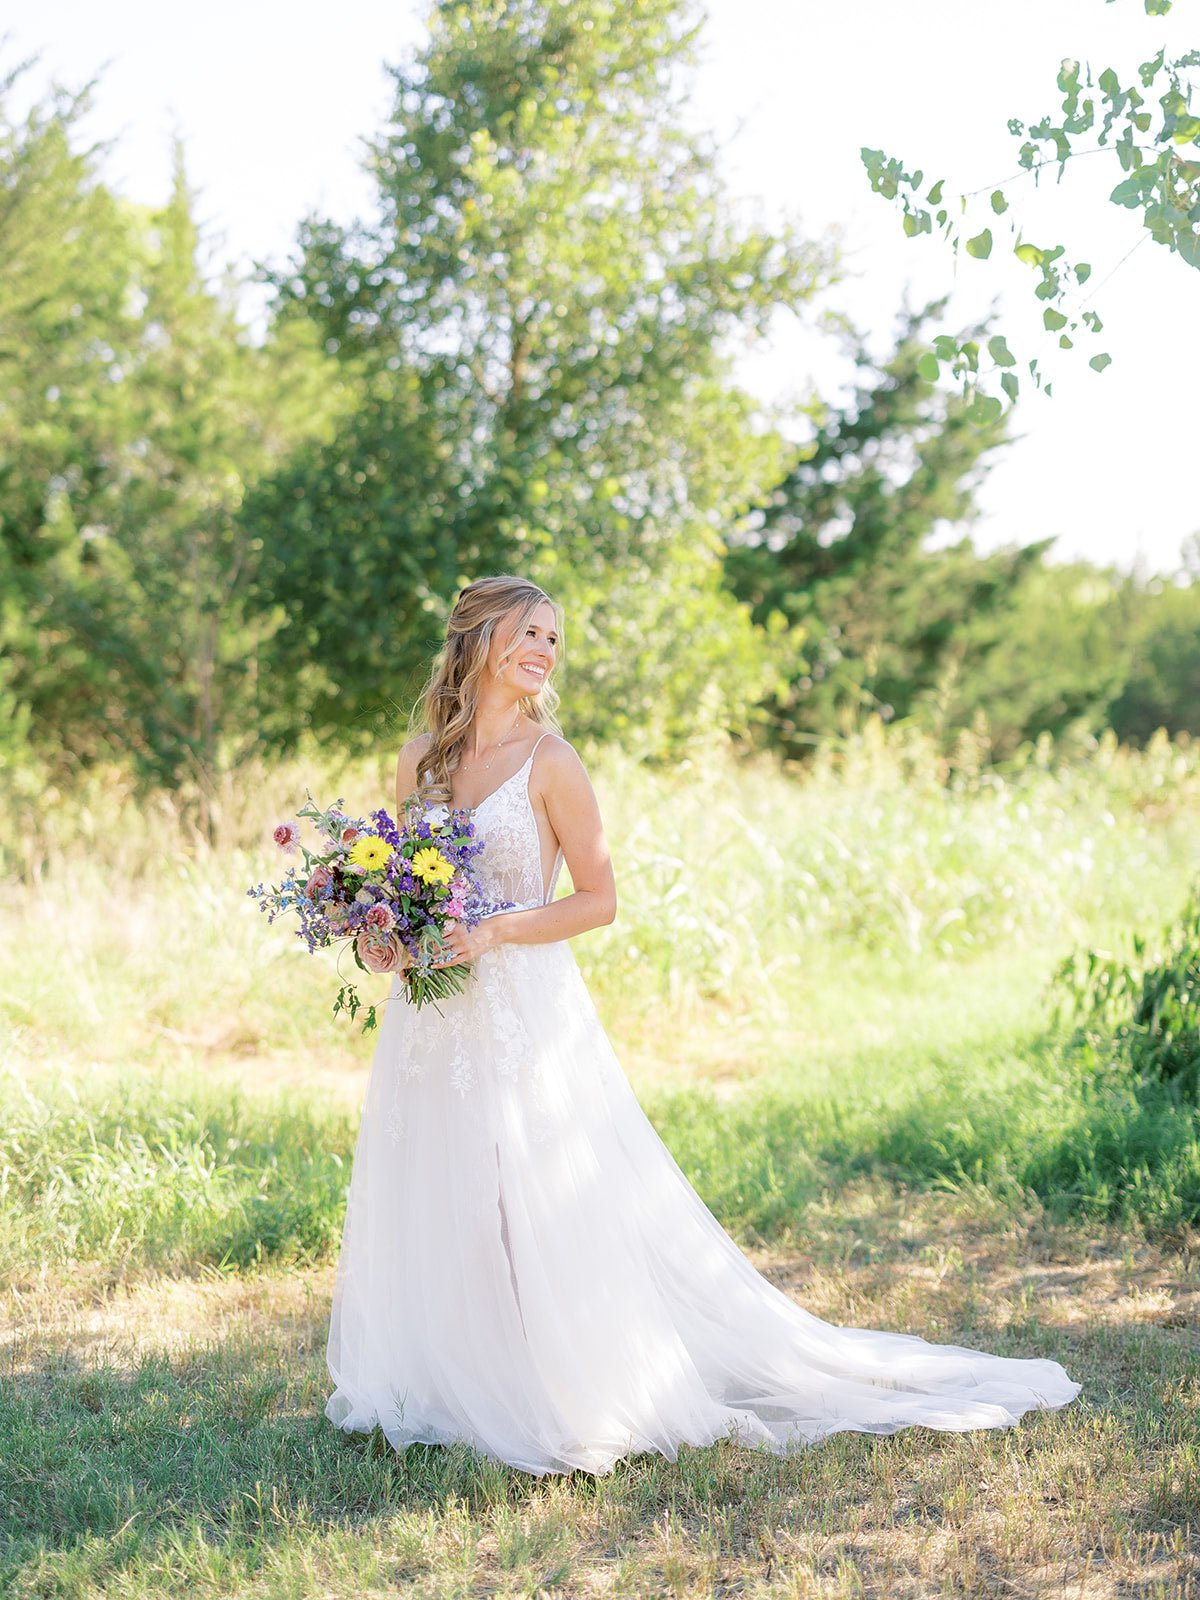 Bride holding a colorful wildflower bouquet